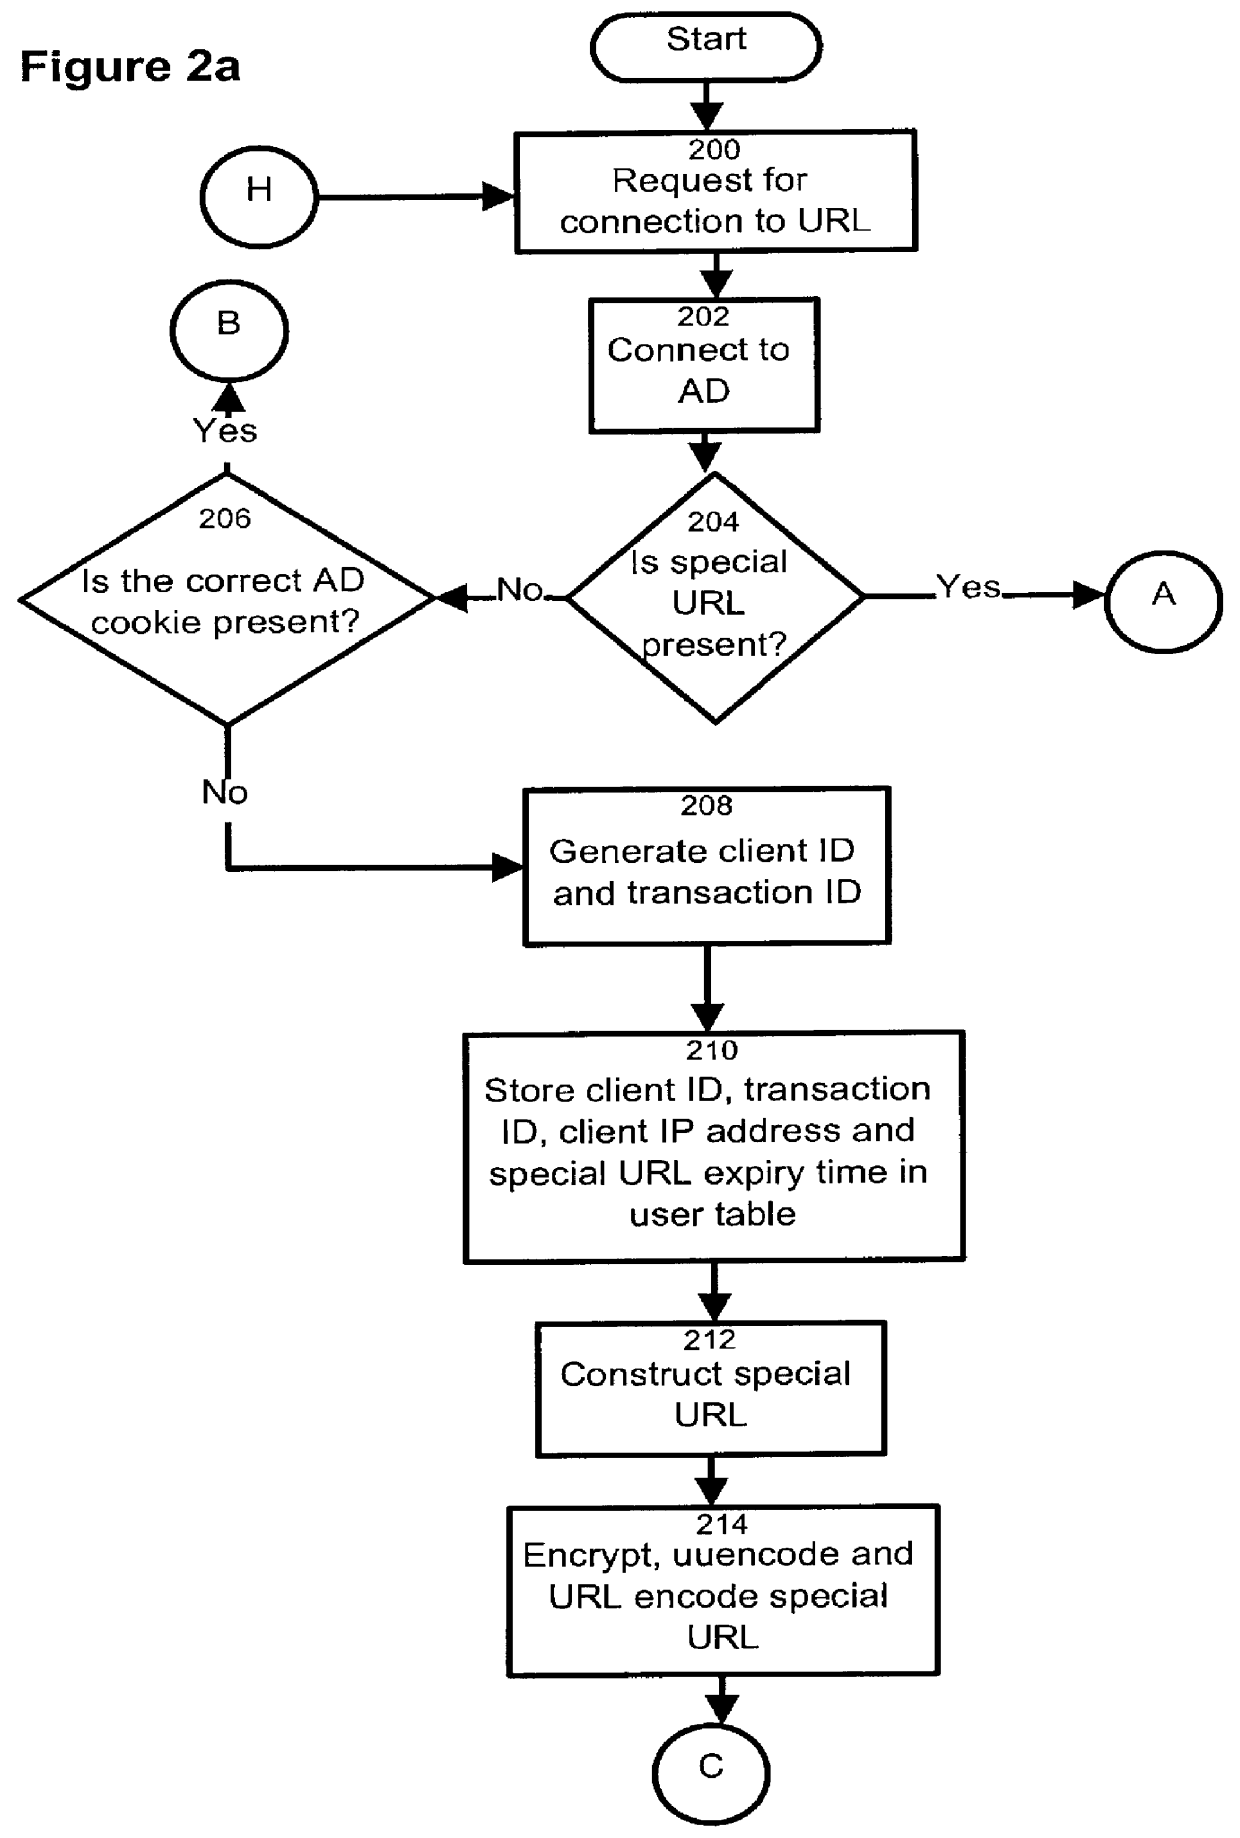 HTTP distributed remote user authentication system